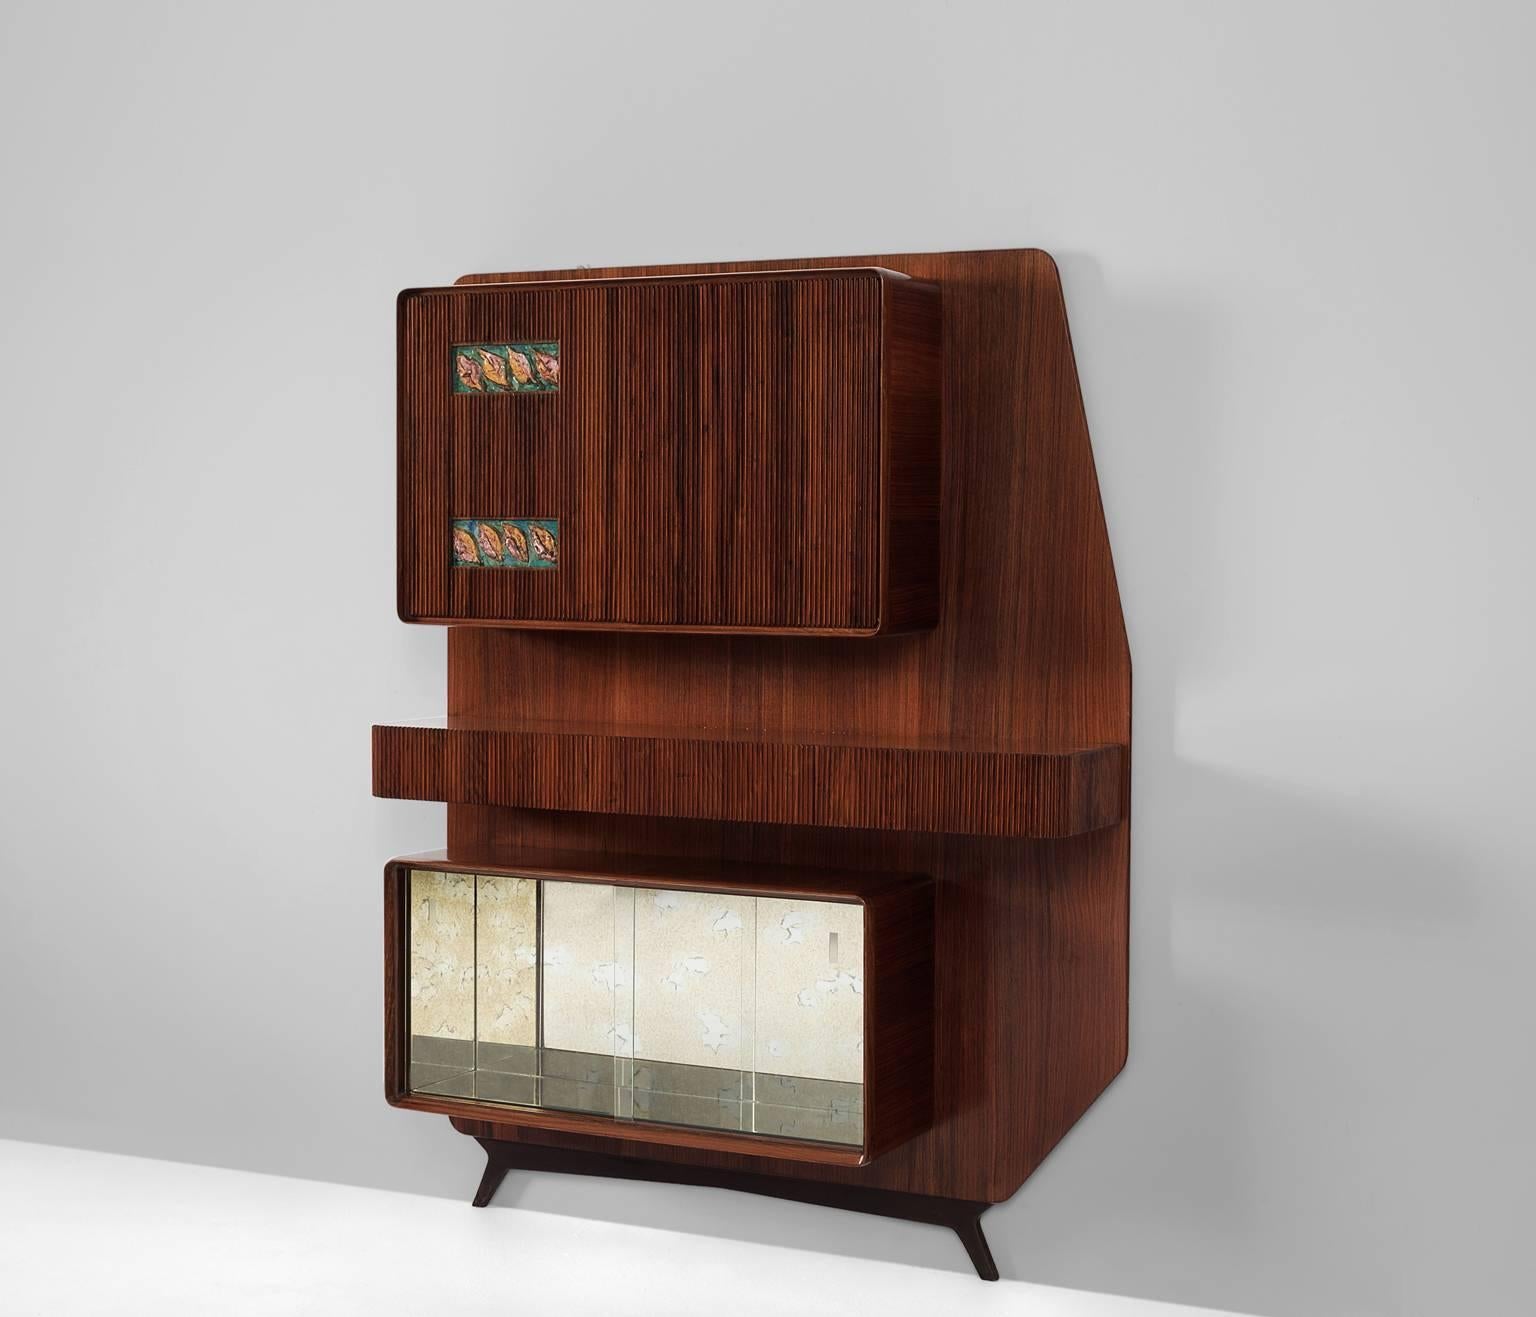 Wall Console in rosewood, glass and ceramic, Italy 1950s.

Eccentric wall console in rosewood. The console consists of cabinets and a shelf or bar. Nicely detailed with ridges rosewood, which emphasizes the verticality of the module.  

The